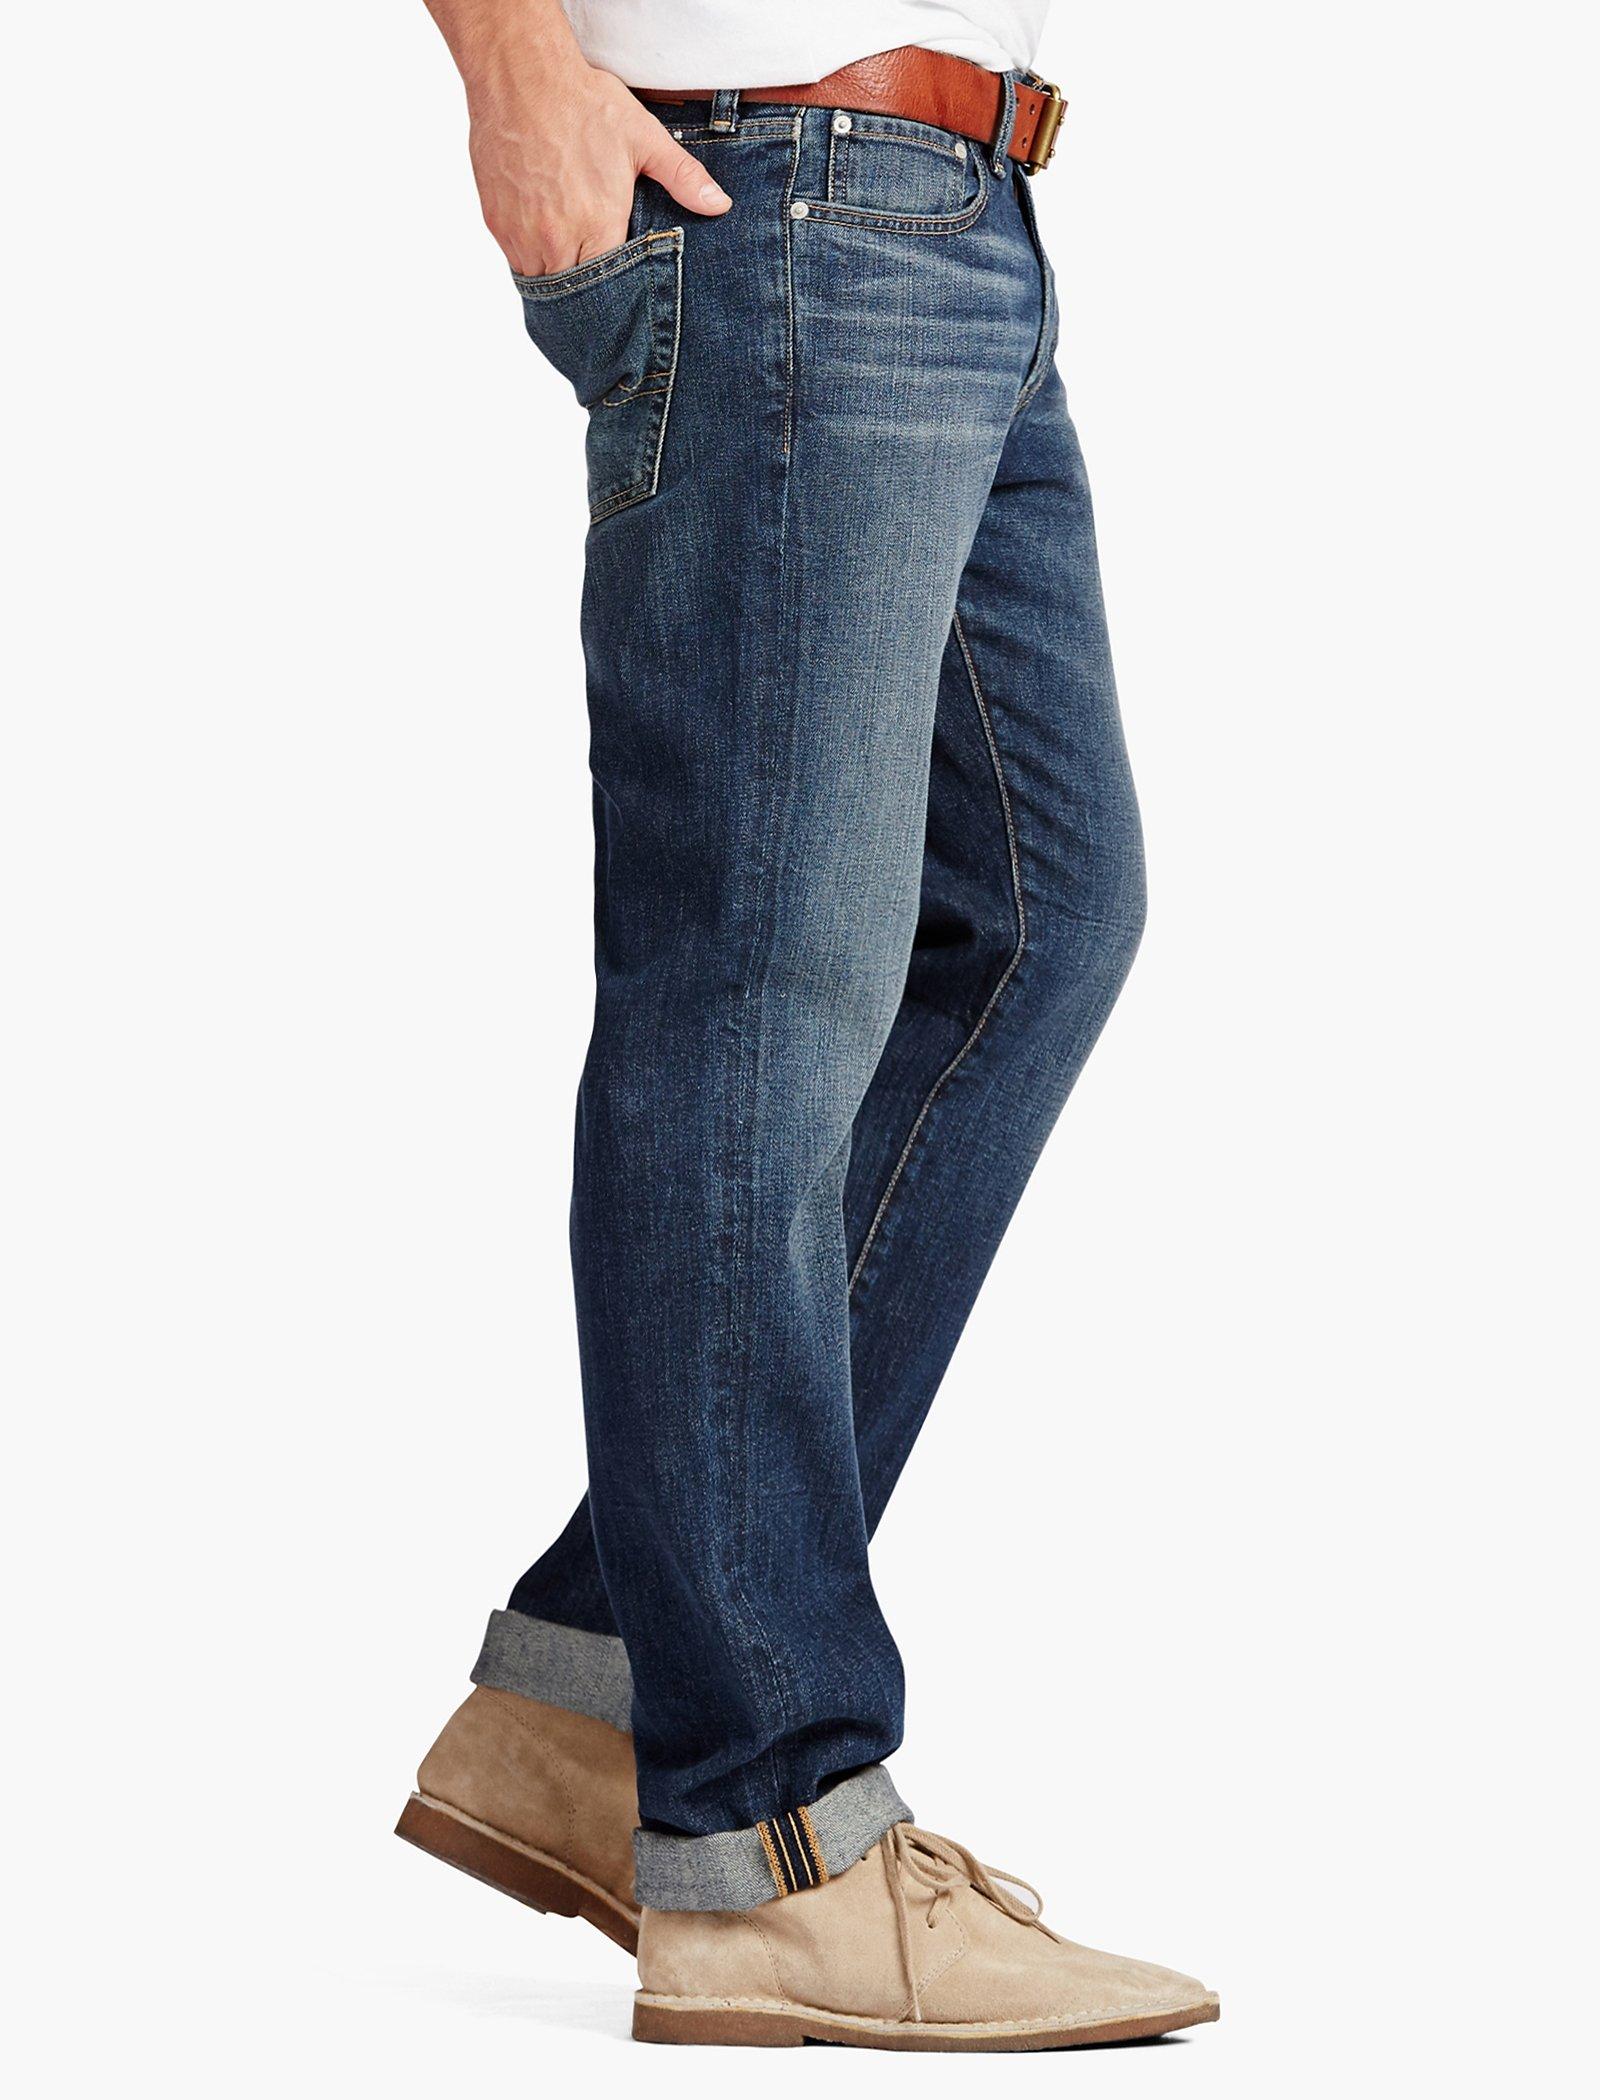 Lucky Brand Jeans 410 Athletic Fit Relaxed 31 X 32  Lucky brand jeans mens,  Athletic fit jeans, Lucky brand jeans